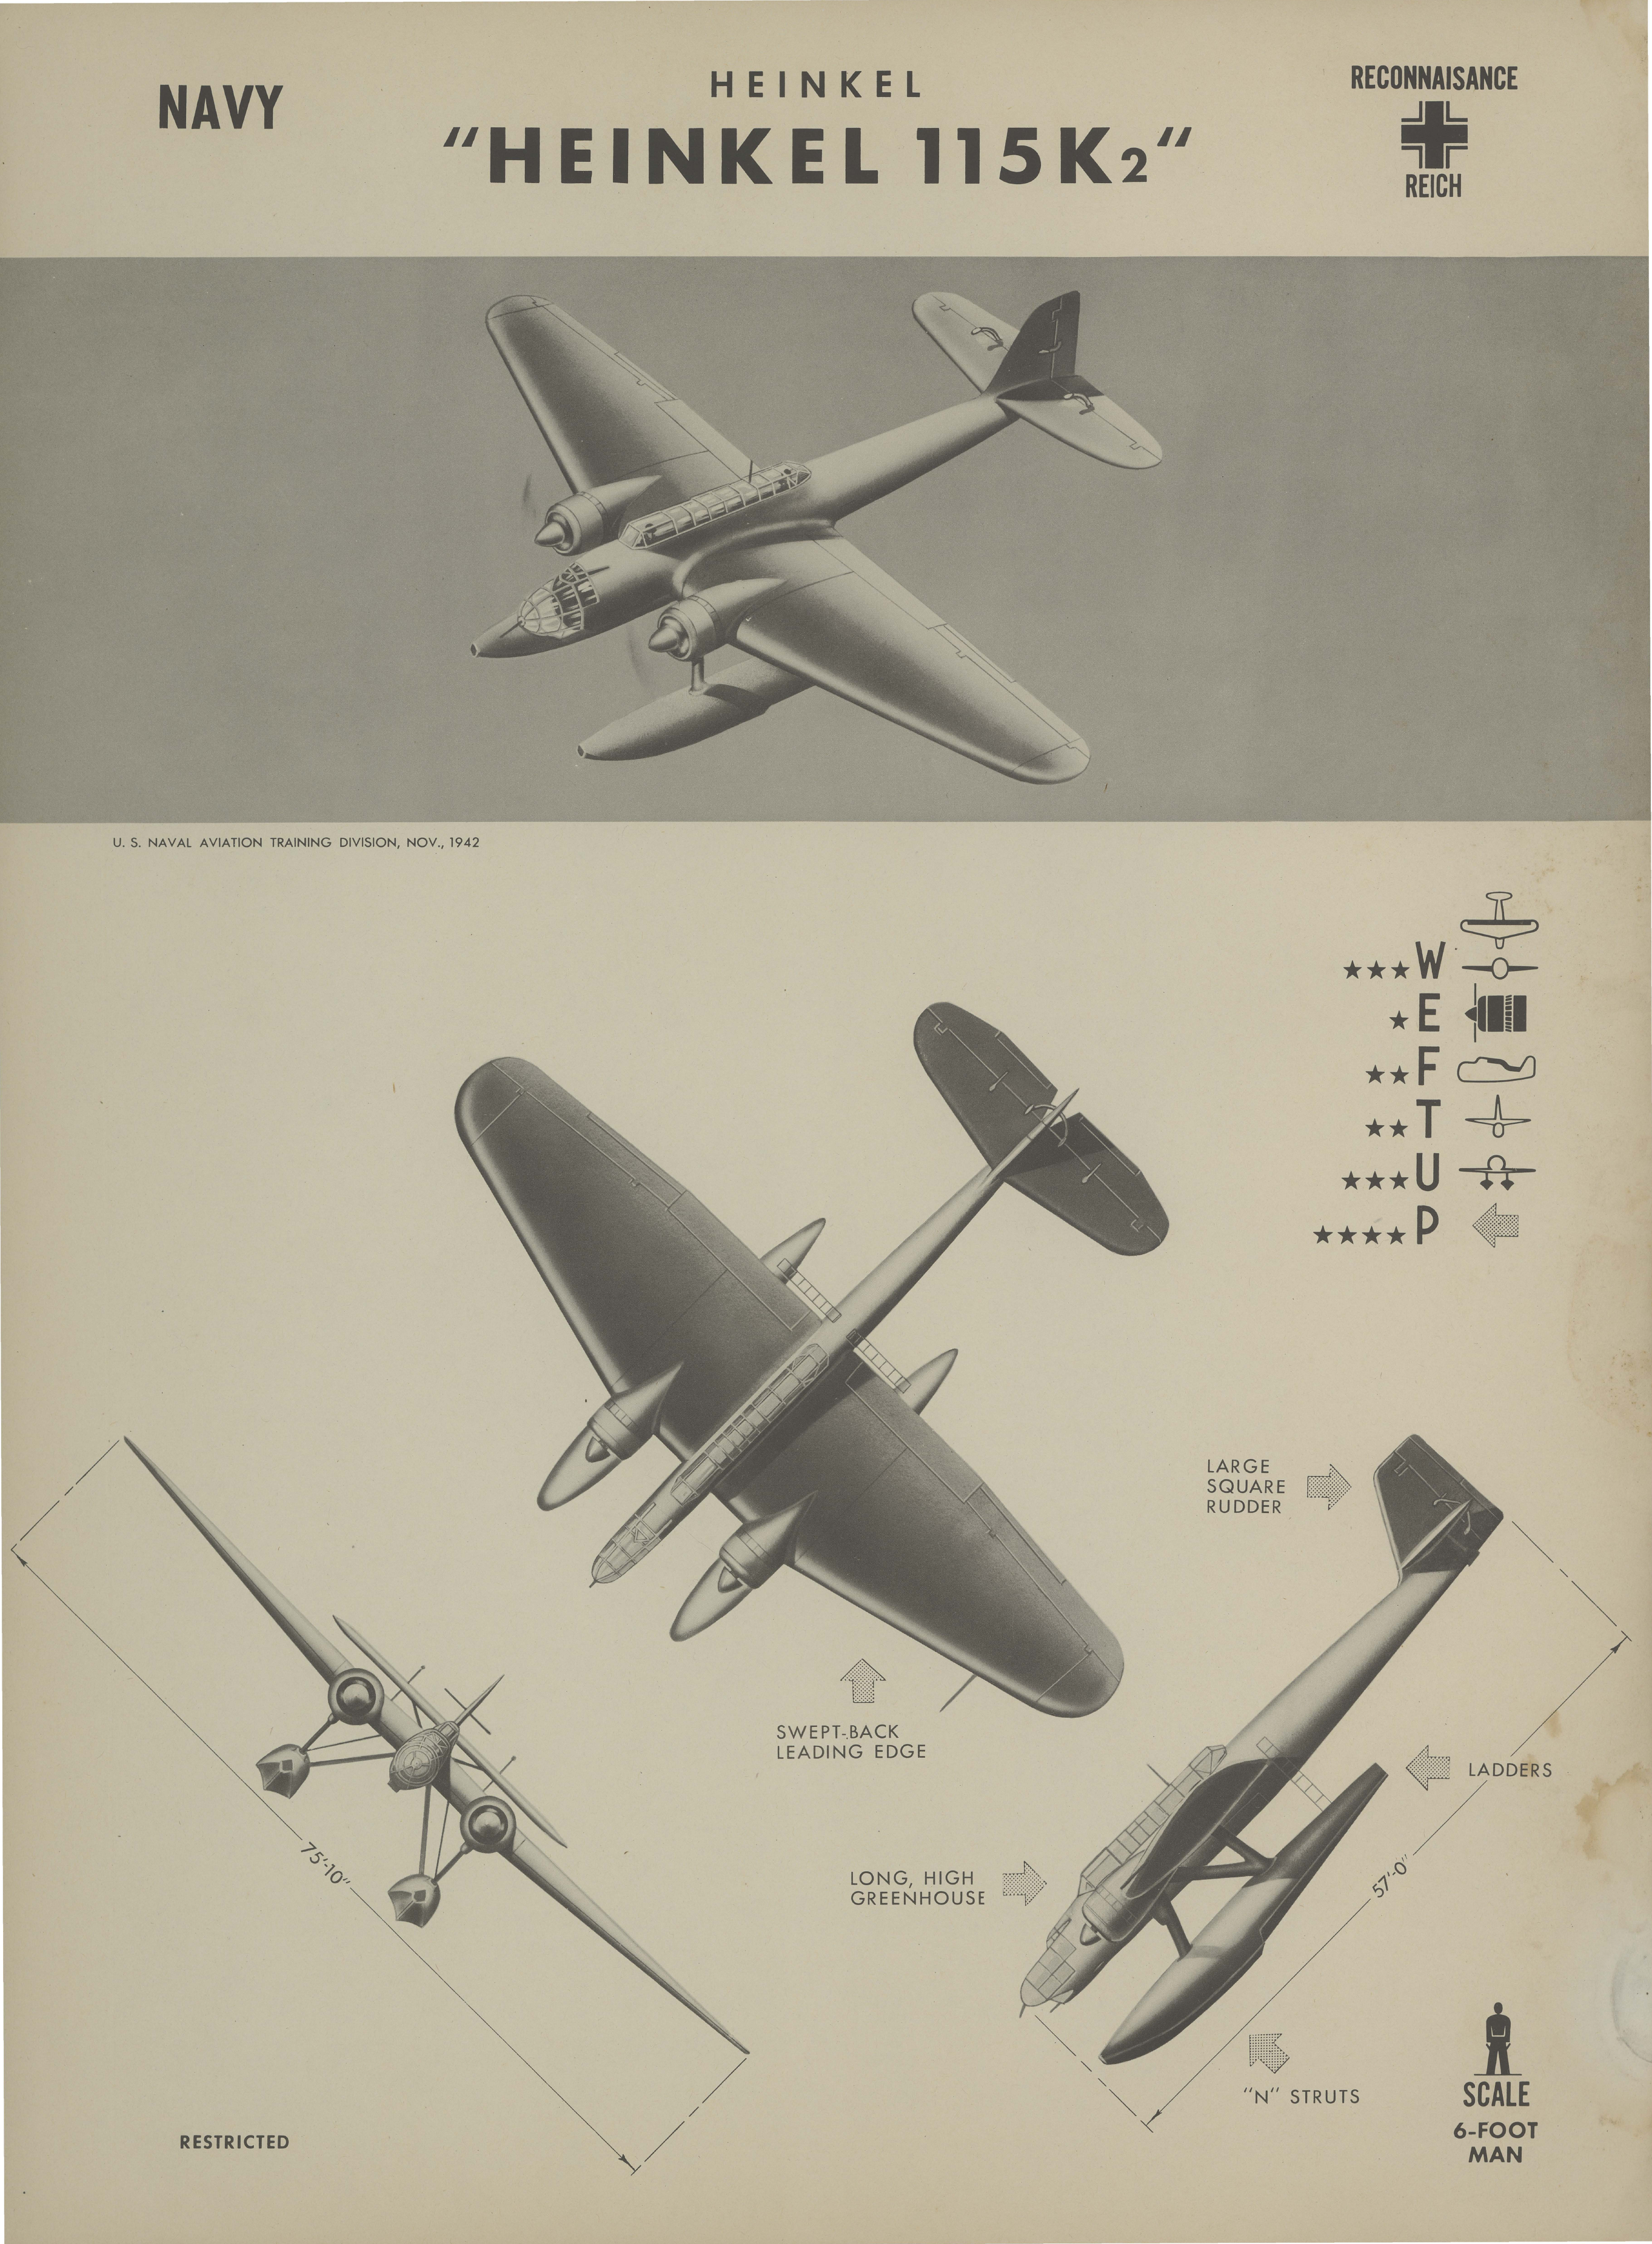 Sample page 1 from AirCorps Library document: Heinkel 115K2 Recognition Poster